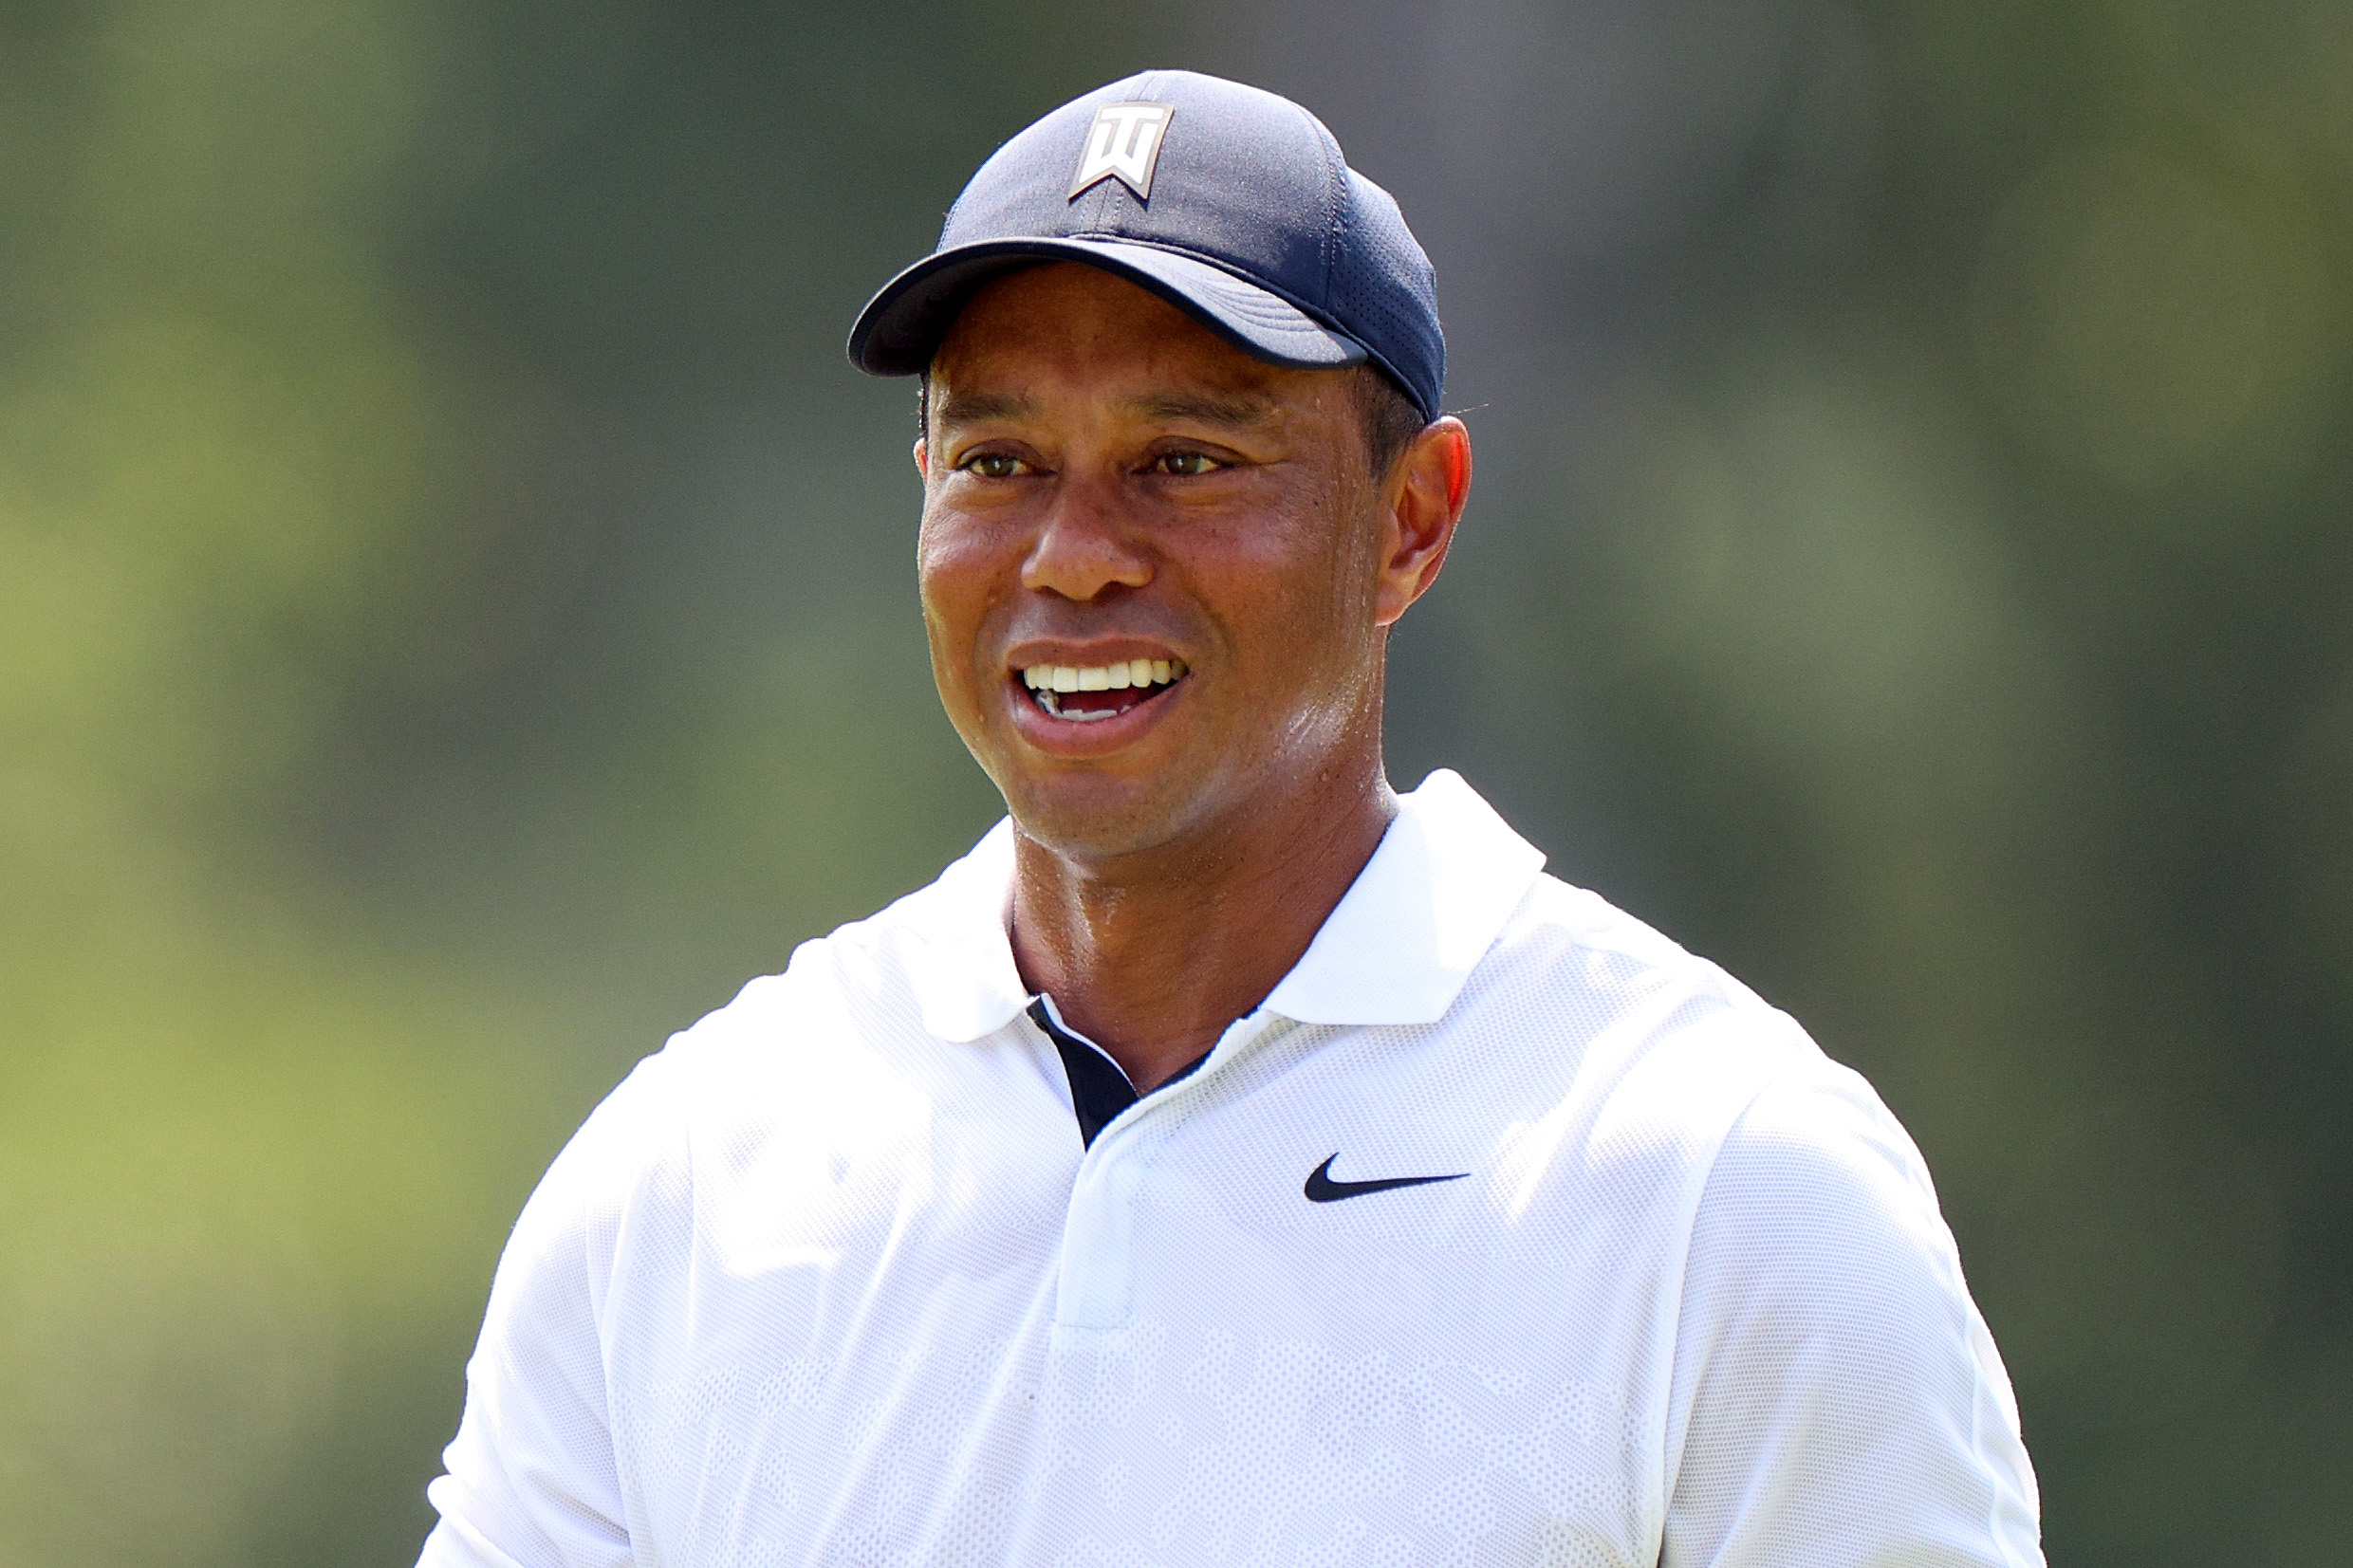 Tiger Woods takes TGL team ownership stake, will play as well